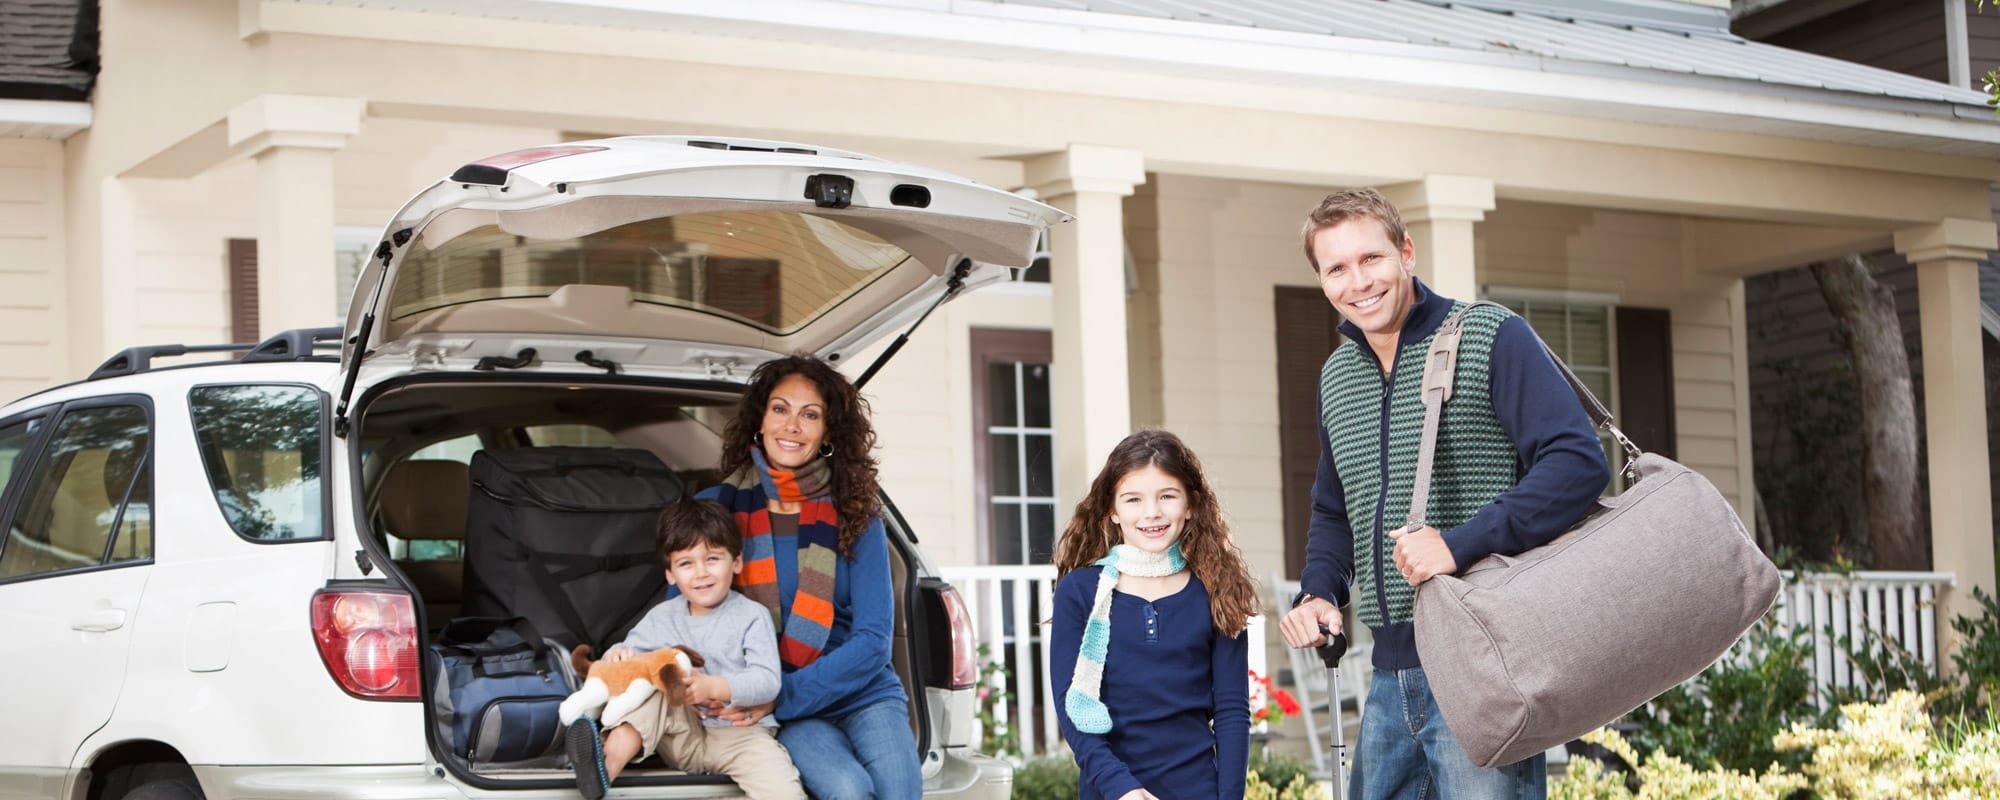 Image of family standing in front of their car while parked in driveway of their home